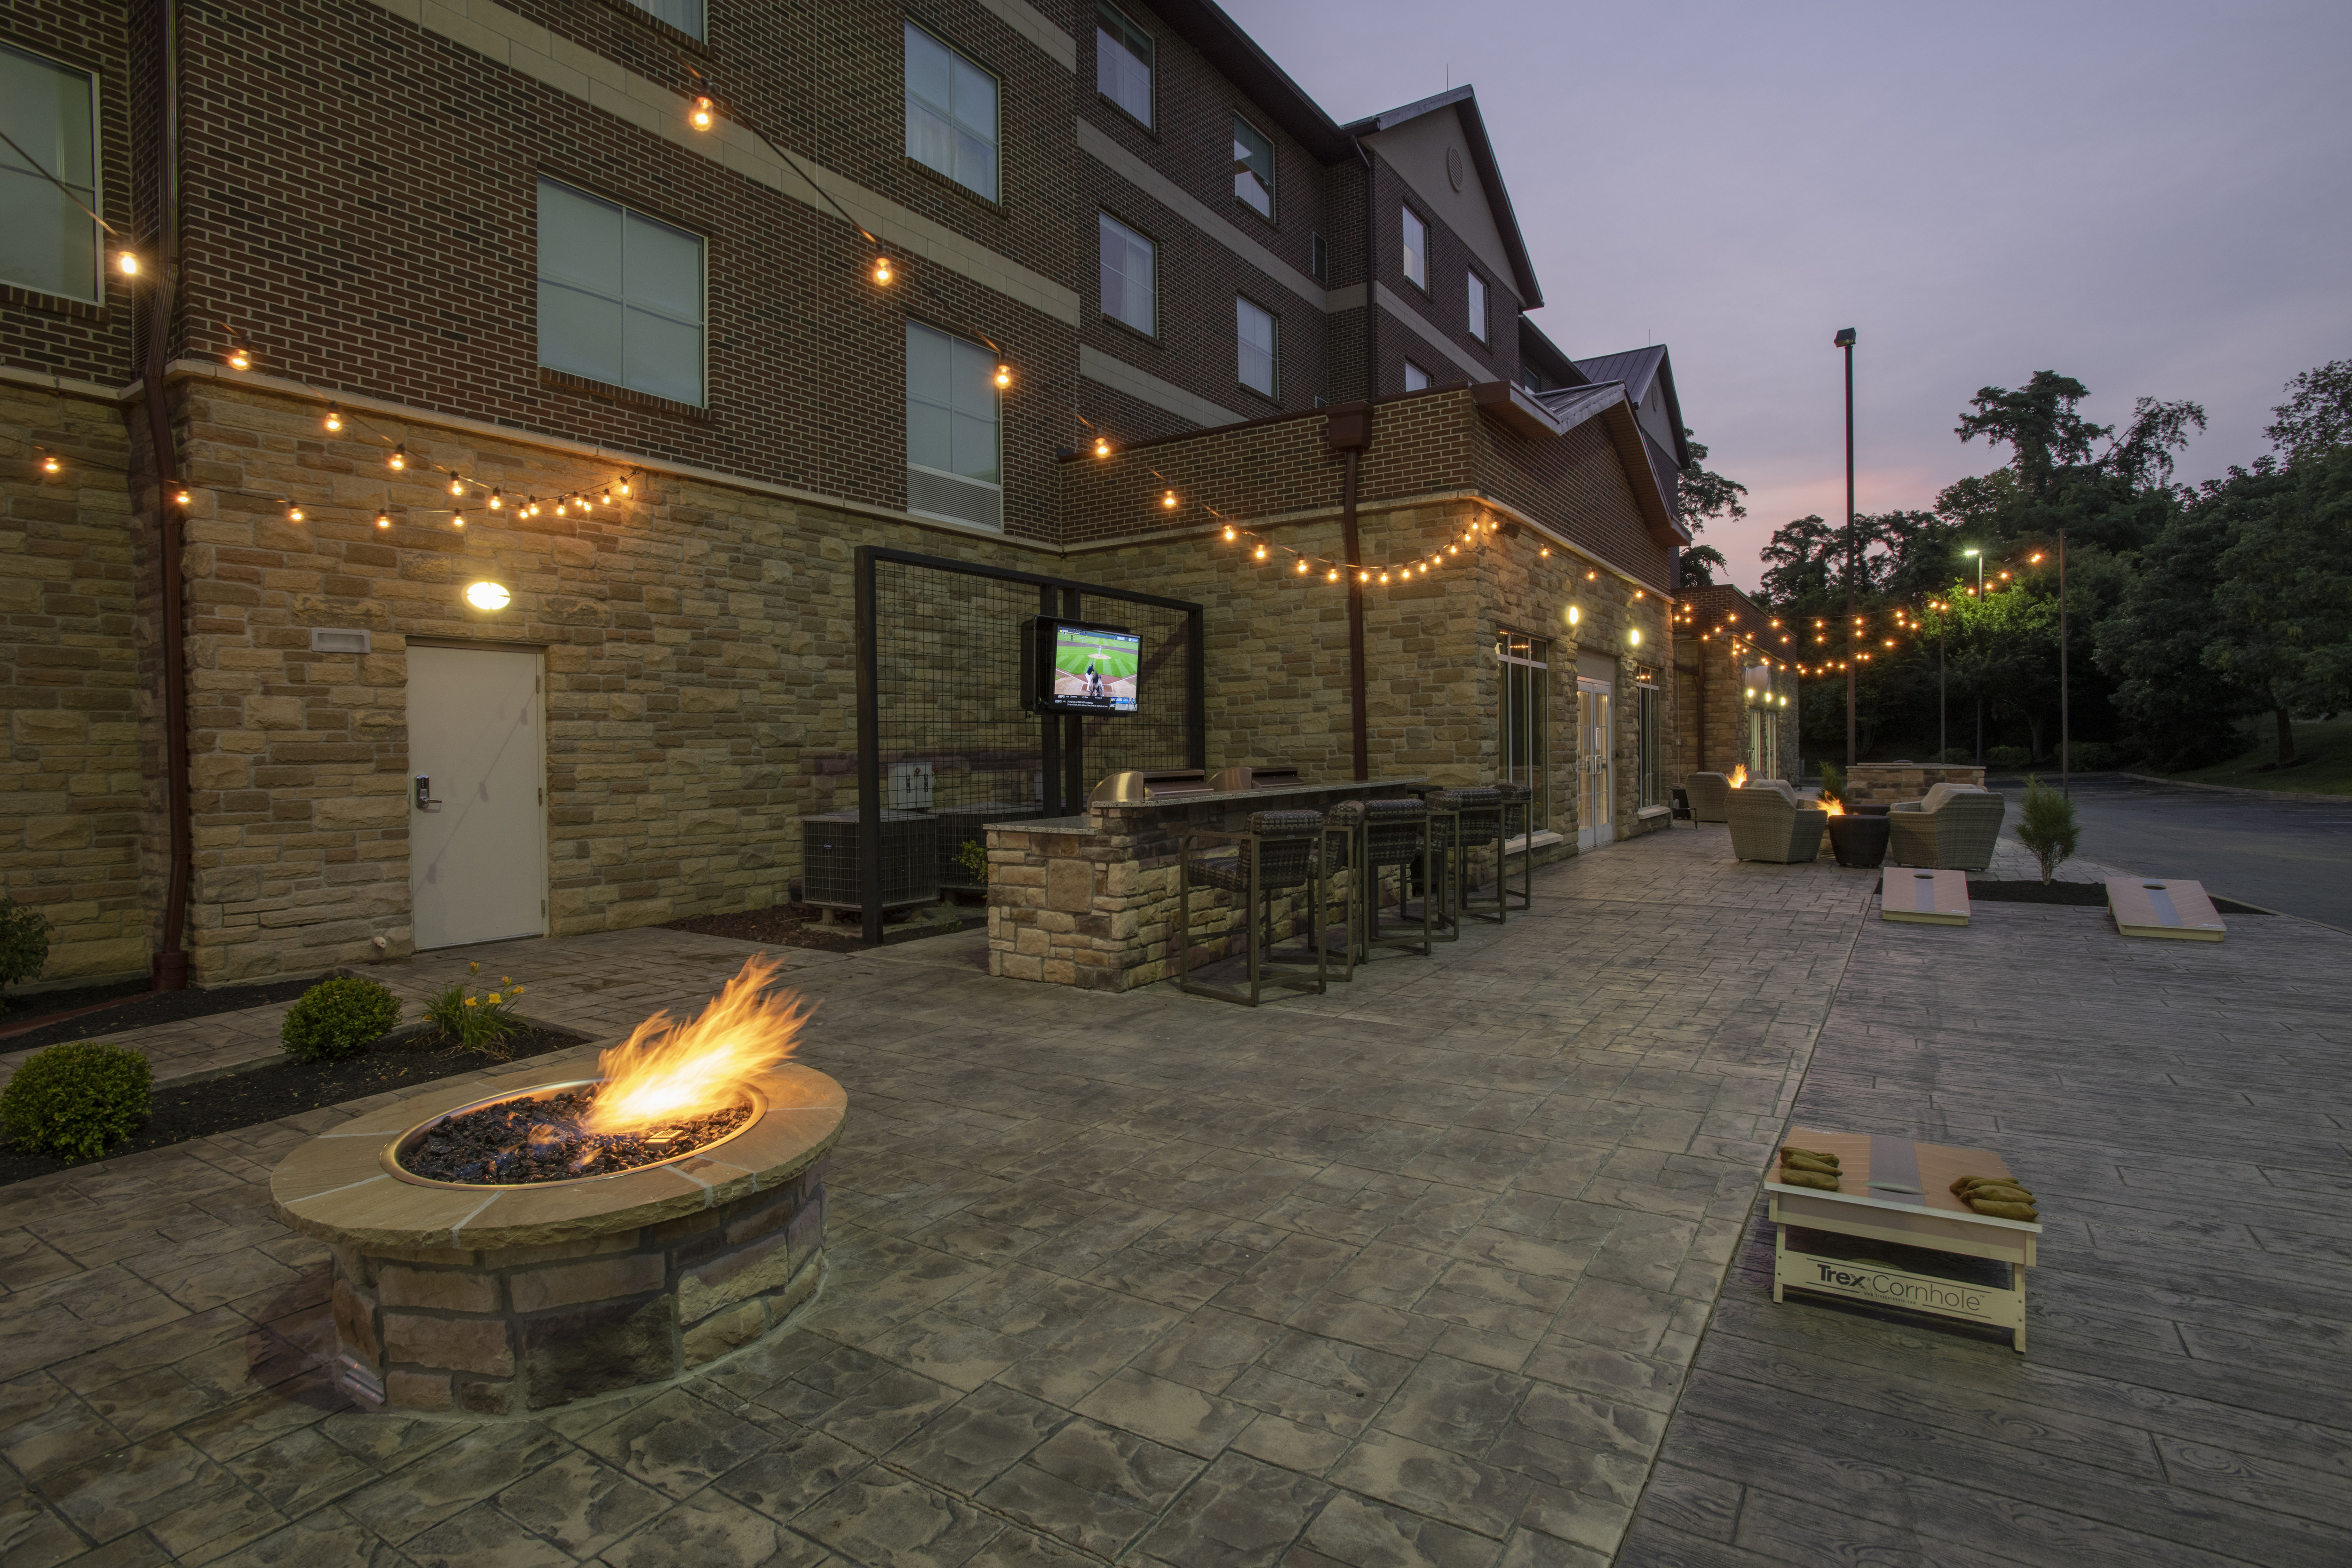 Fire Pit in Outdoor Patio with HDTV and a Large Table